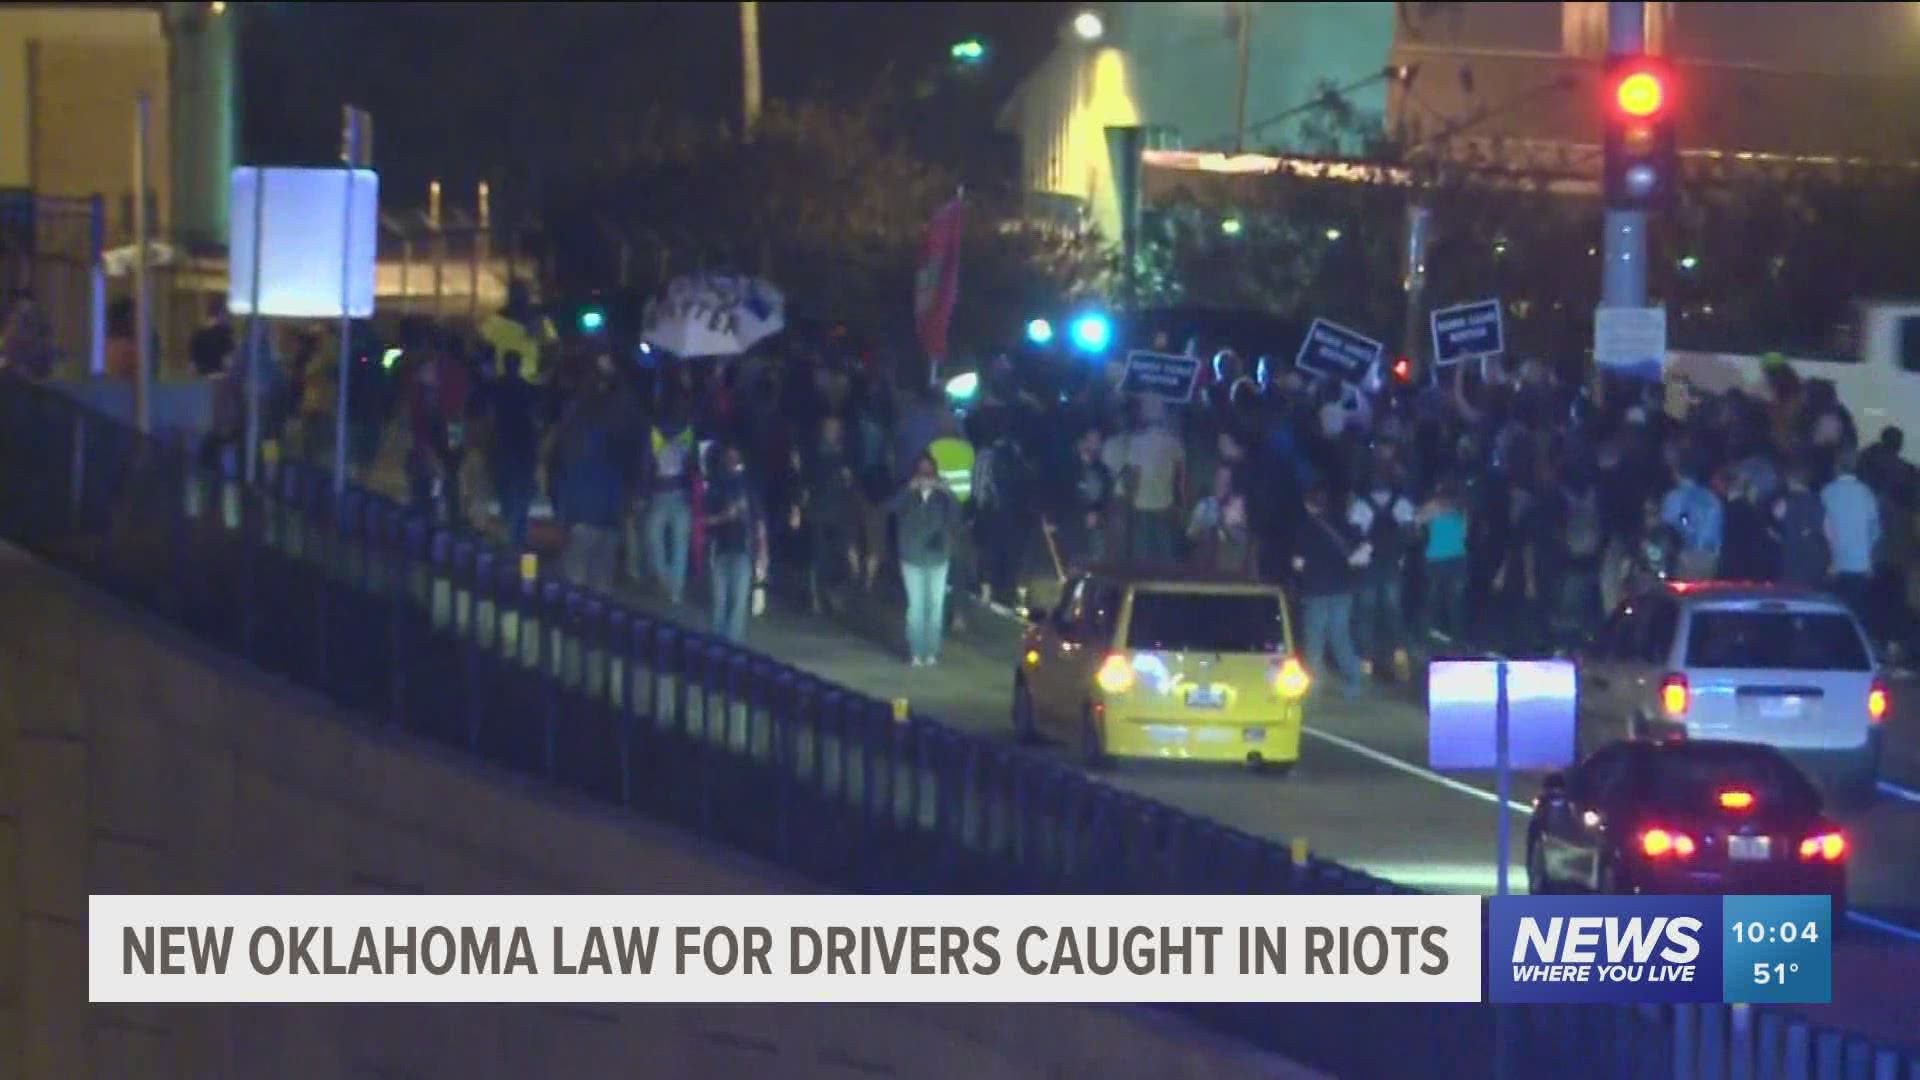 The measure says drivers will not be held liable if they flee the scene of a riot and injure or kill individuals if they think it was necessary to protect themselves